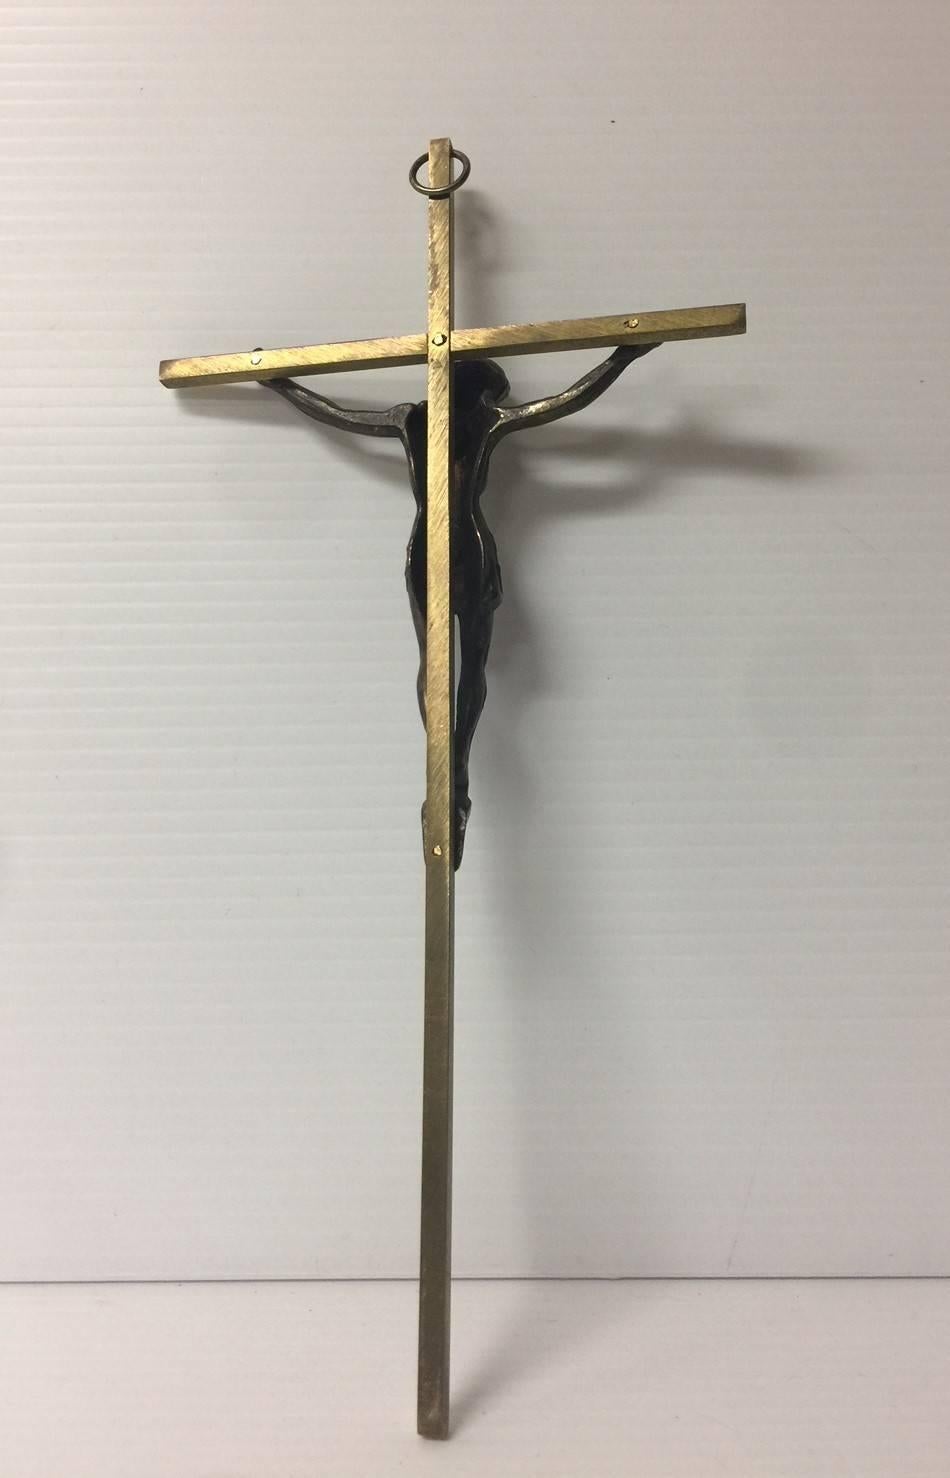 A very nice brass crucifix, circa 1960s. Nice weight and detail.